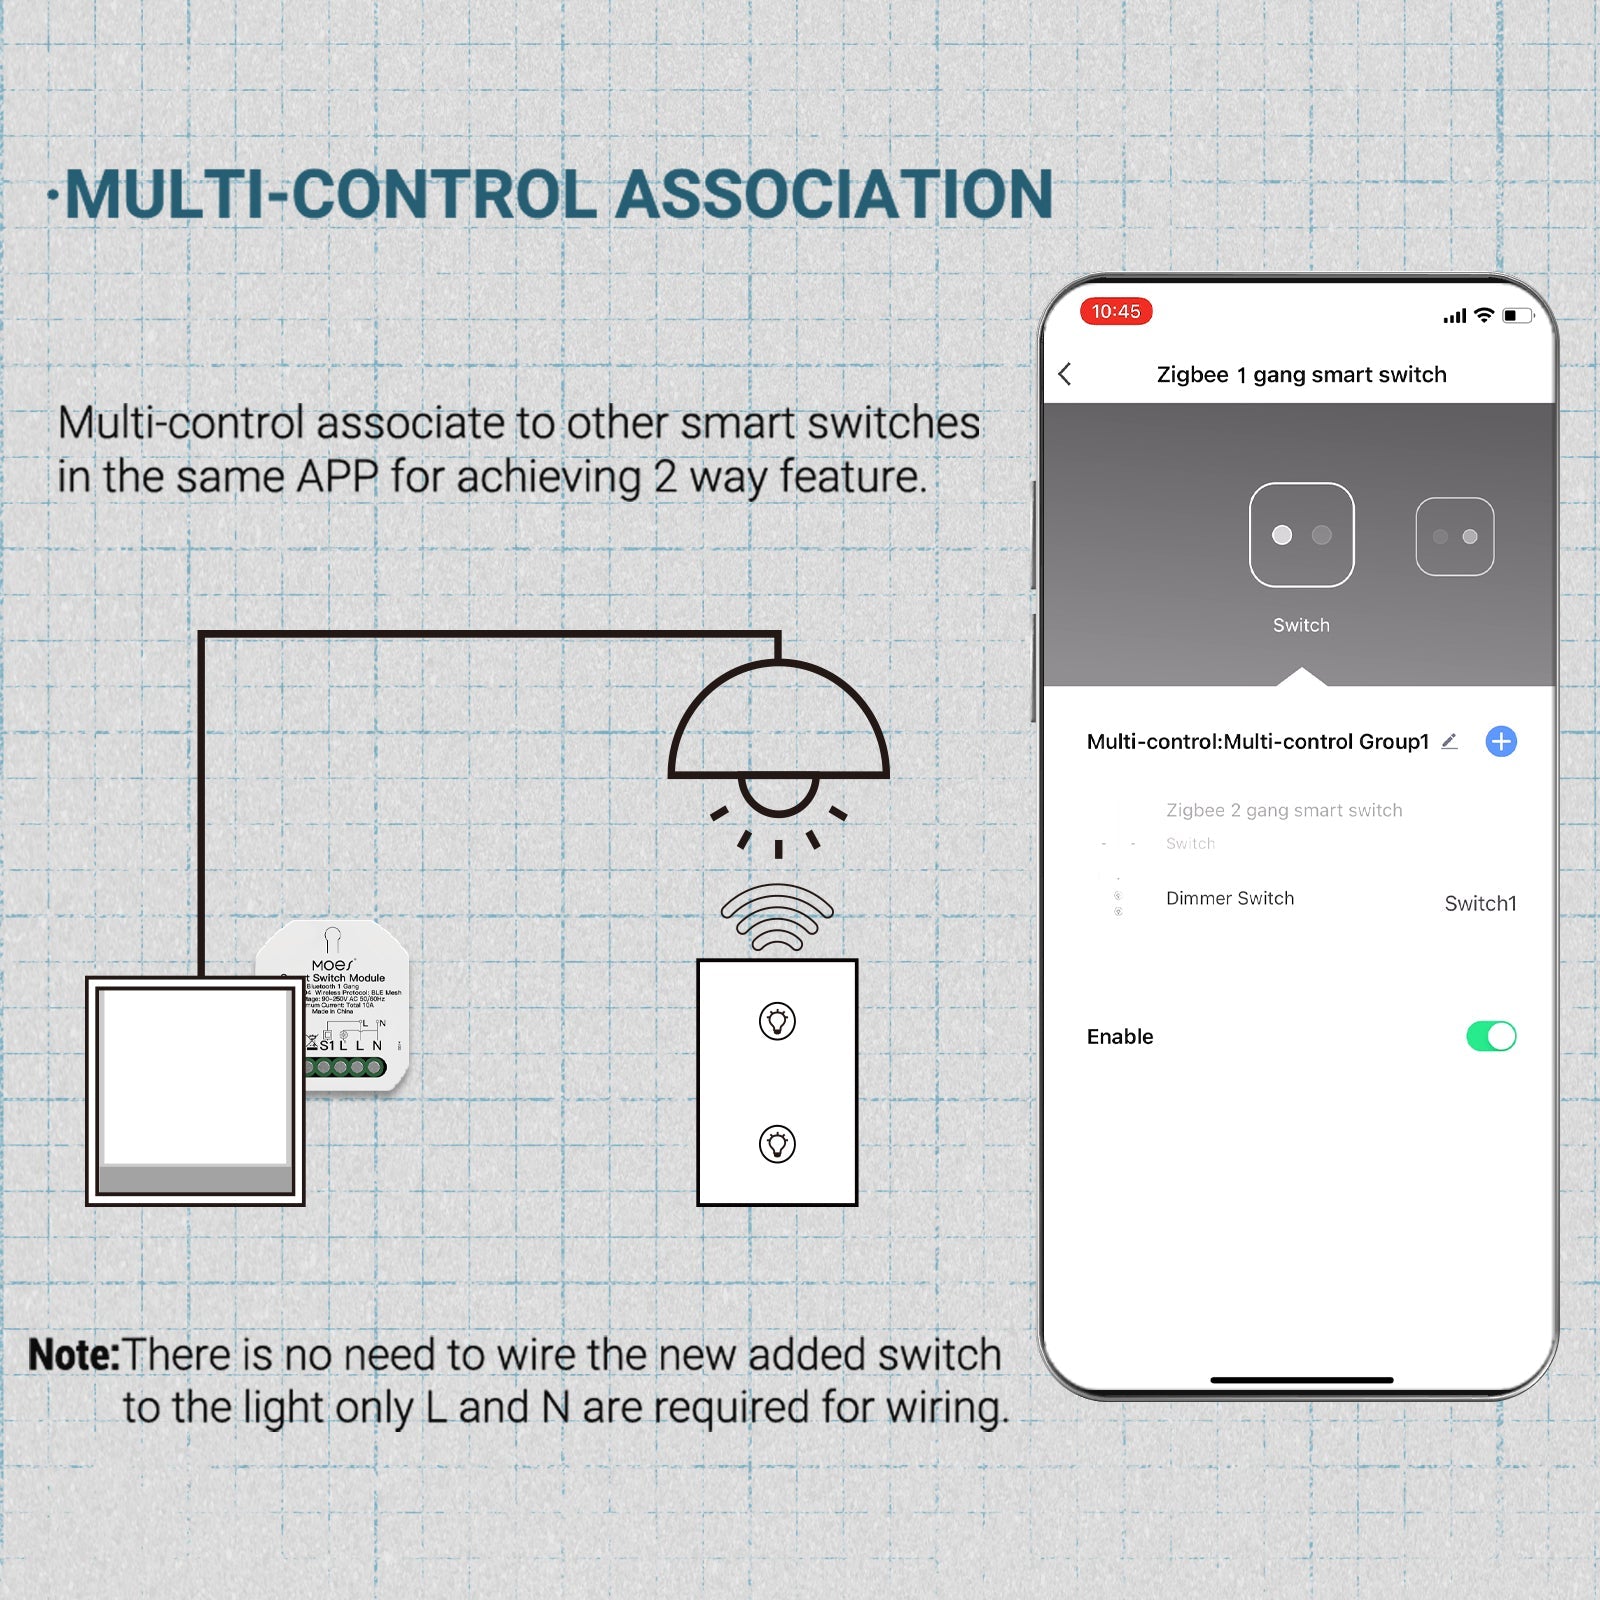 MOES Tuya Smart Bluetooth 1 Gang Mini Switch Module DIY Light Breaker BLE SIGMESH Smart Life APP Point-to-point Remote Control Work with Alexa Google Home 1/2 Way Hub Required for US EU UK wall switch box - MOES